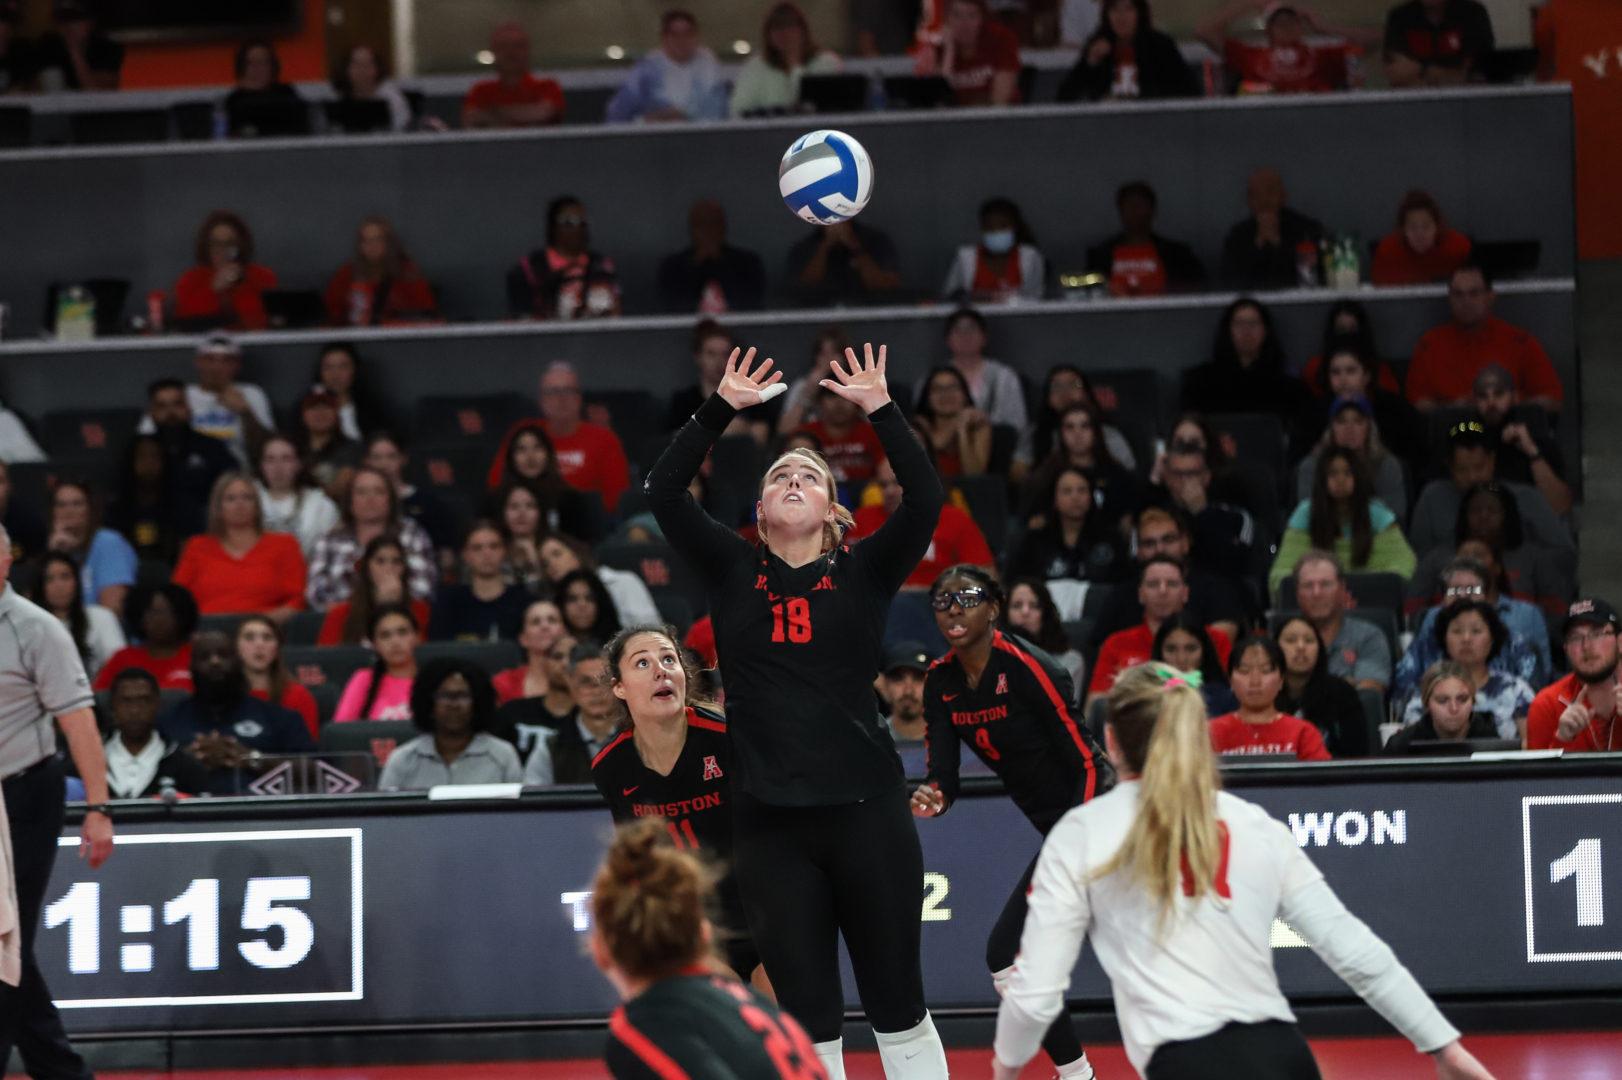 In 32 matches played this season, UH setter Annie Cooke has recorded 623 assists to help the Cougars reach the Sweet 16. | Sean Thomas/The Cougar